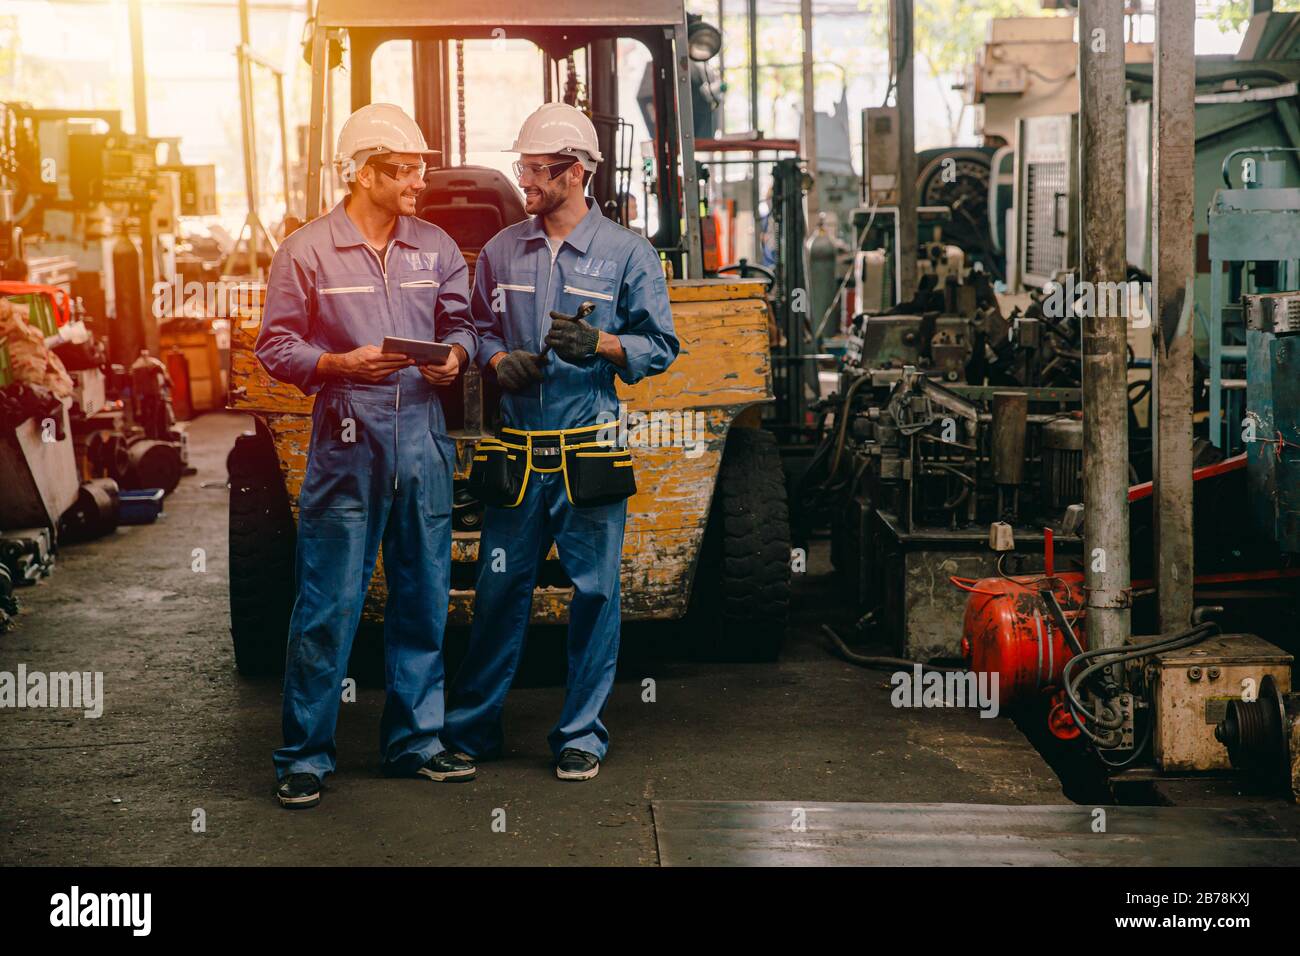 happy worker, working in heavy industry talking smiling together. Stock Photo